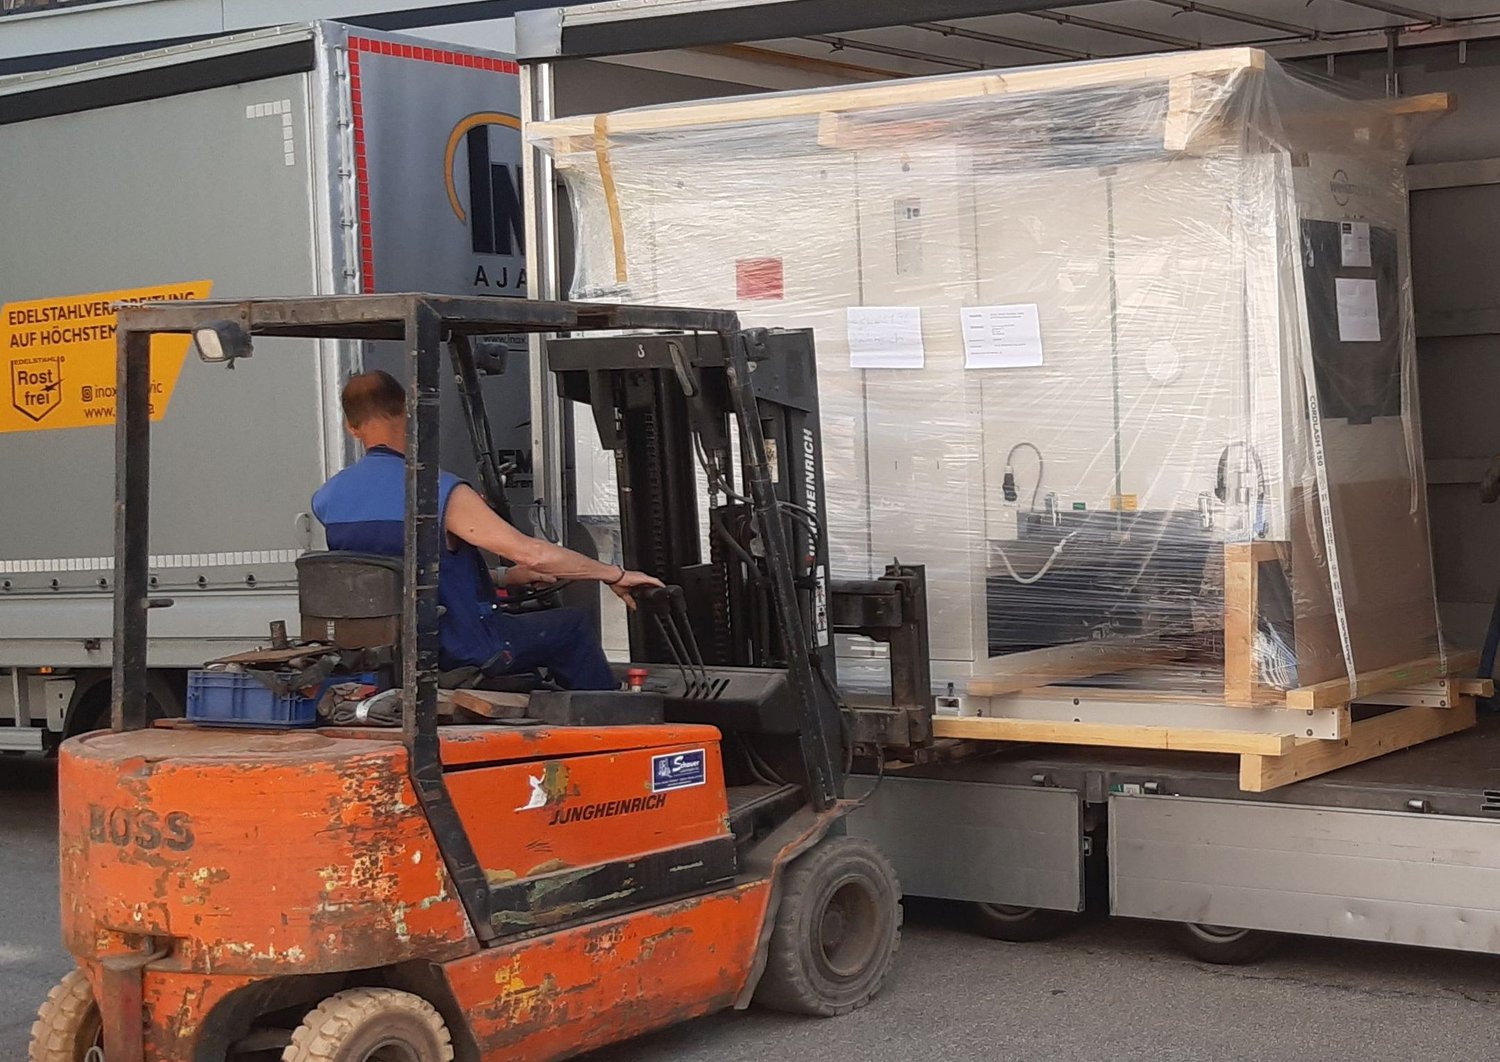 climate chamber being unloaded from a truck with a forklift